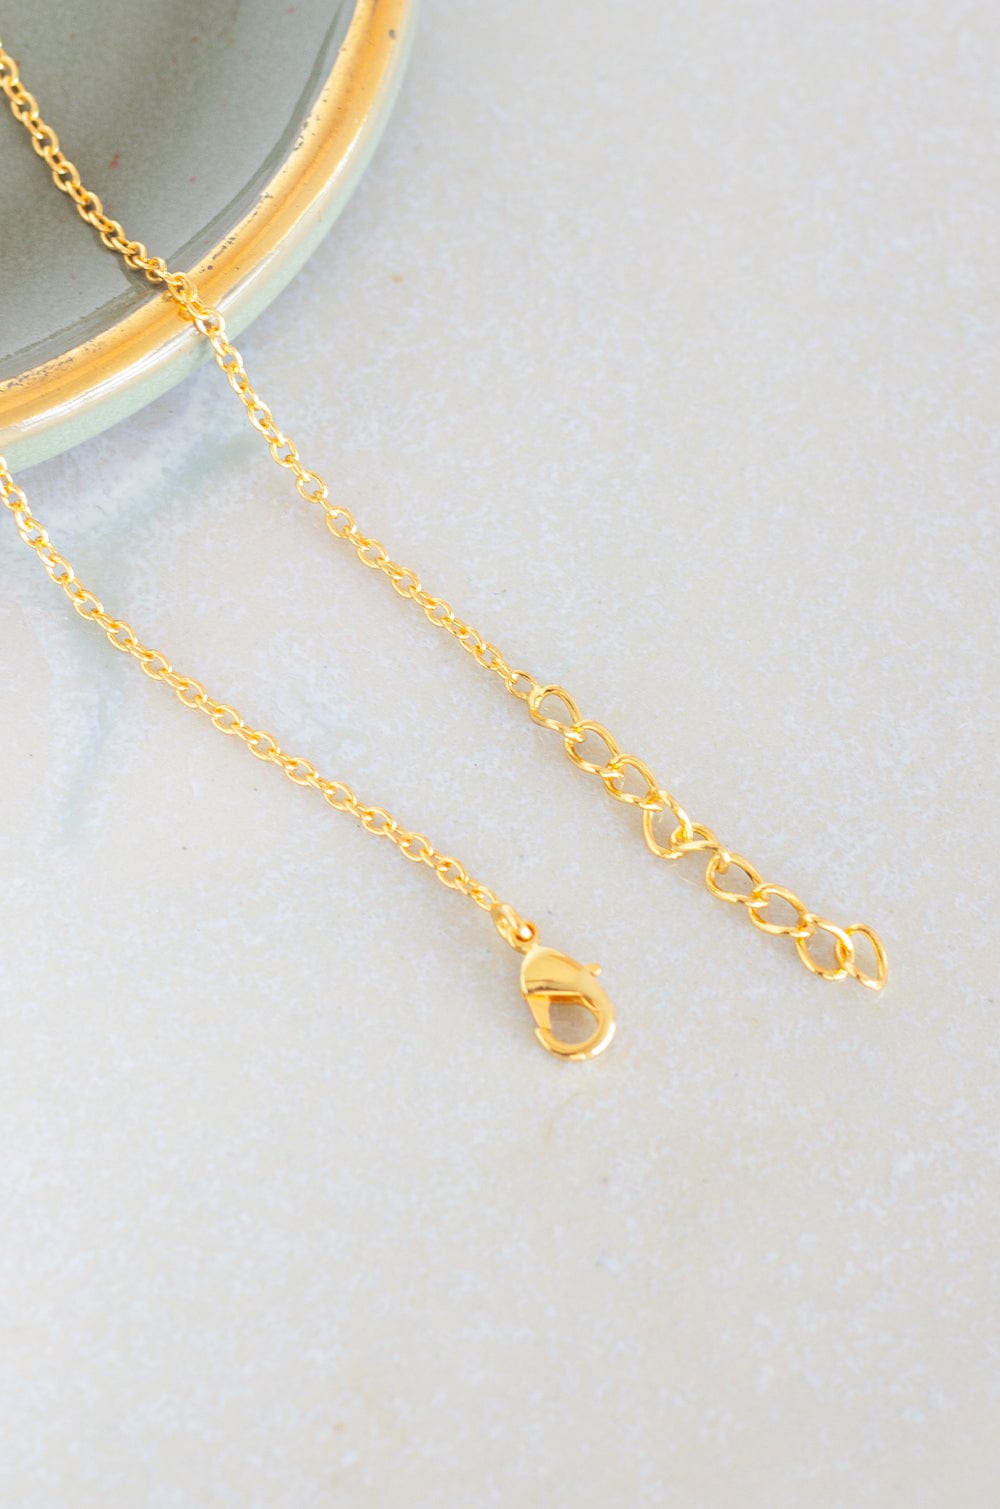 Alice's Tea Party Gold Plated Pendant Necklace